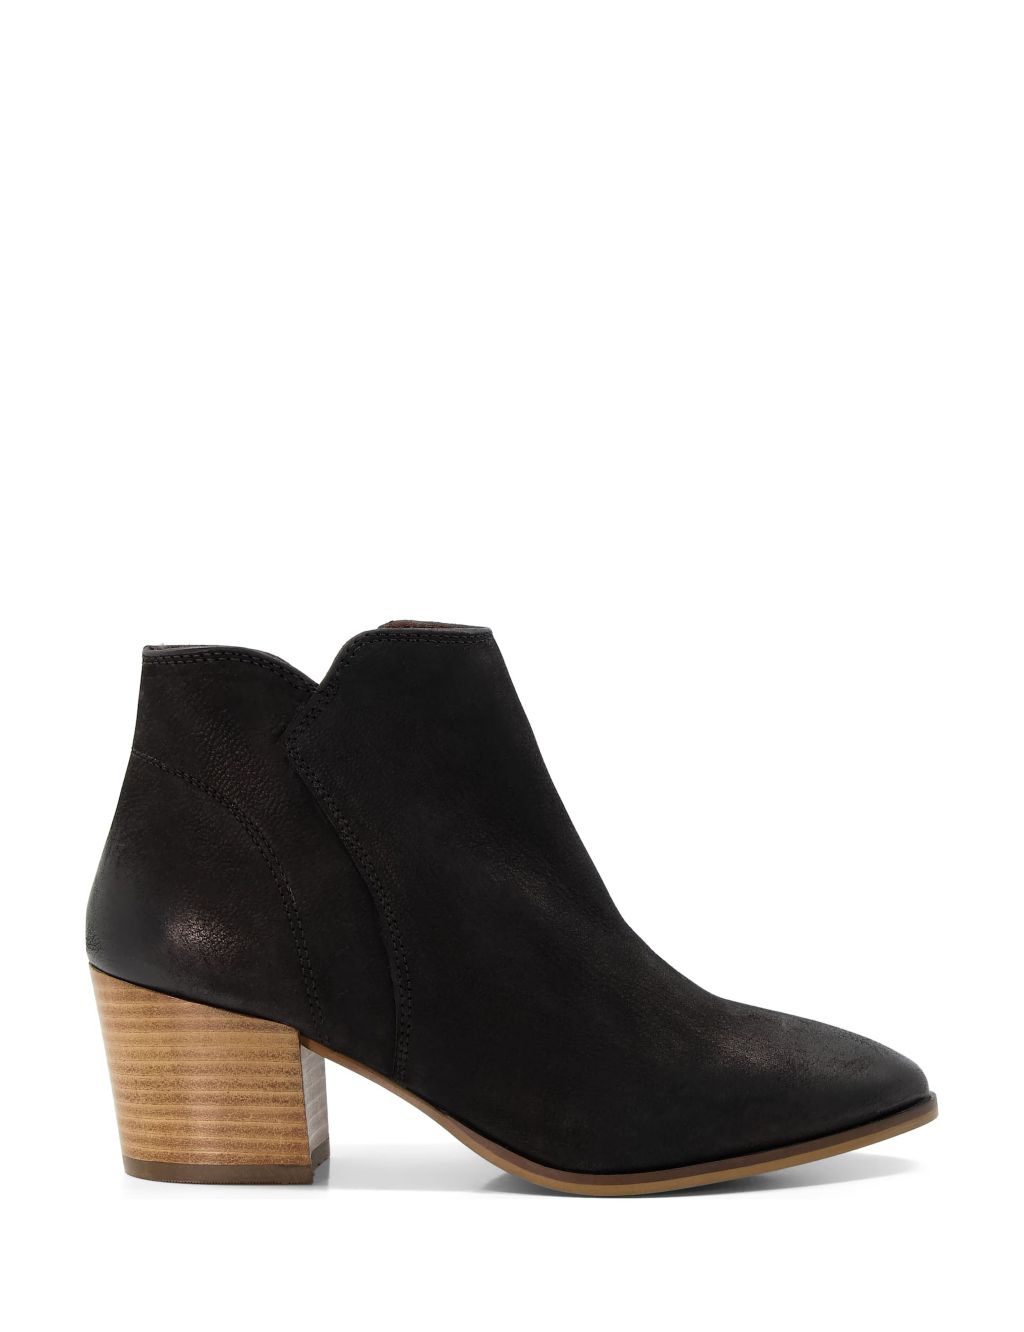 Wide Fit Suede Block Heel Ankle Boots